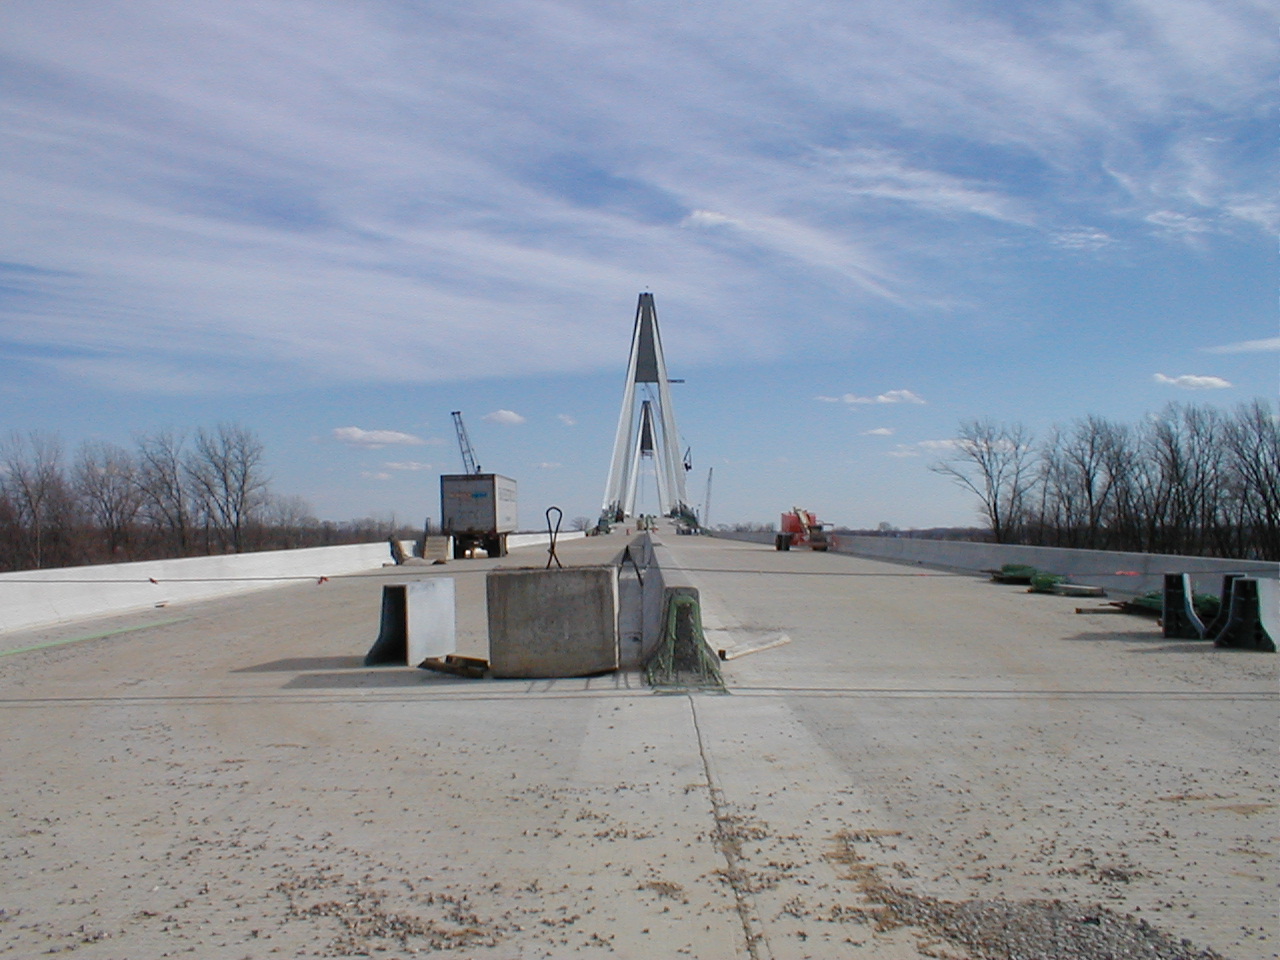 A view of the deck of the bridge from the Indiana side.